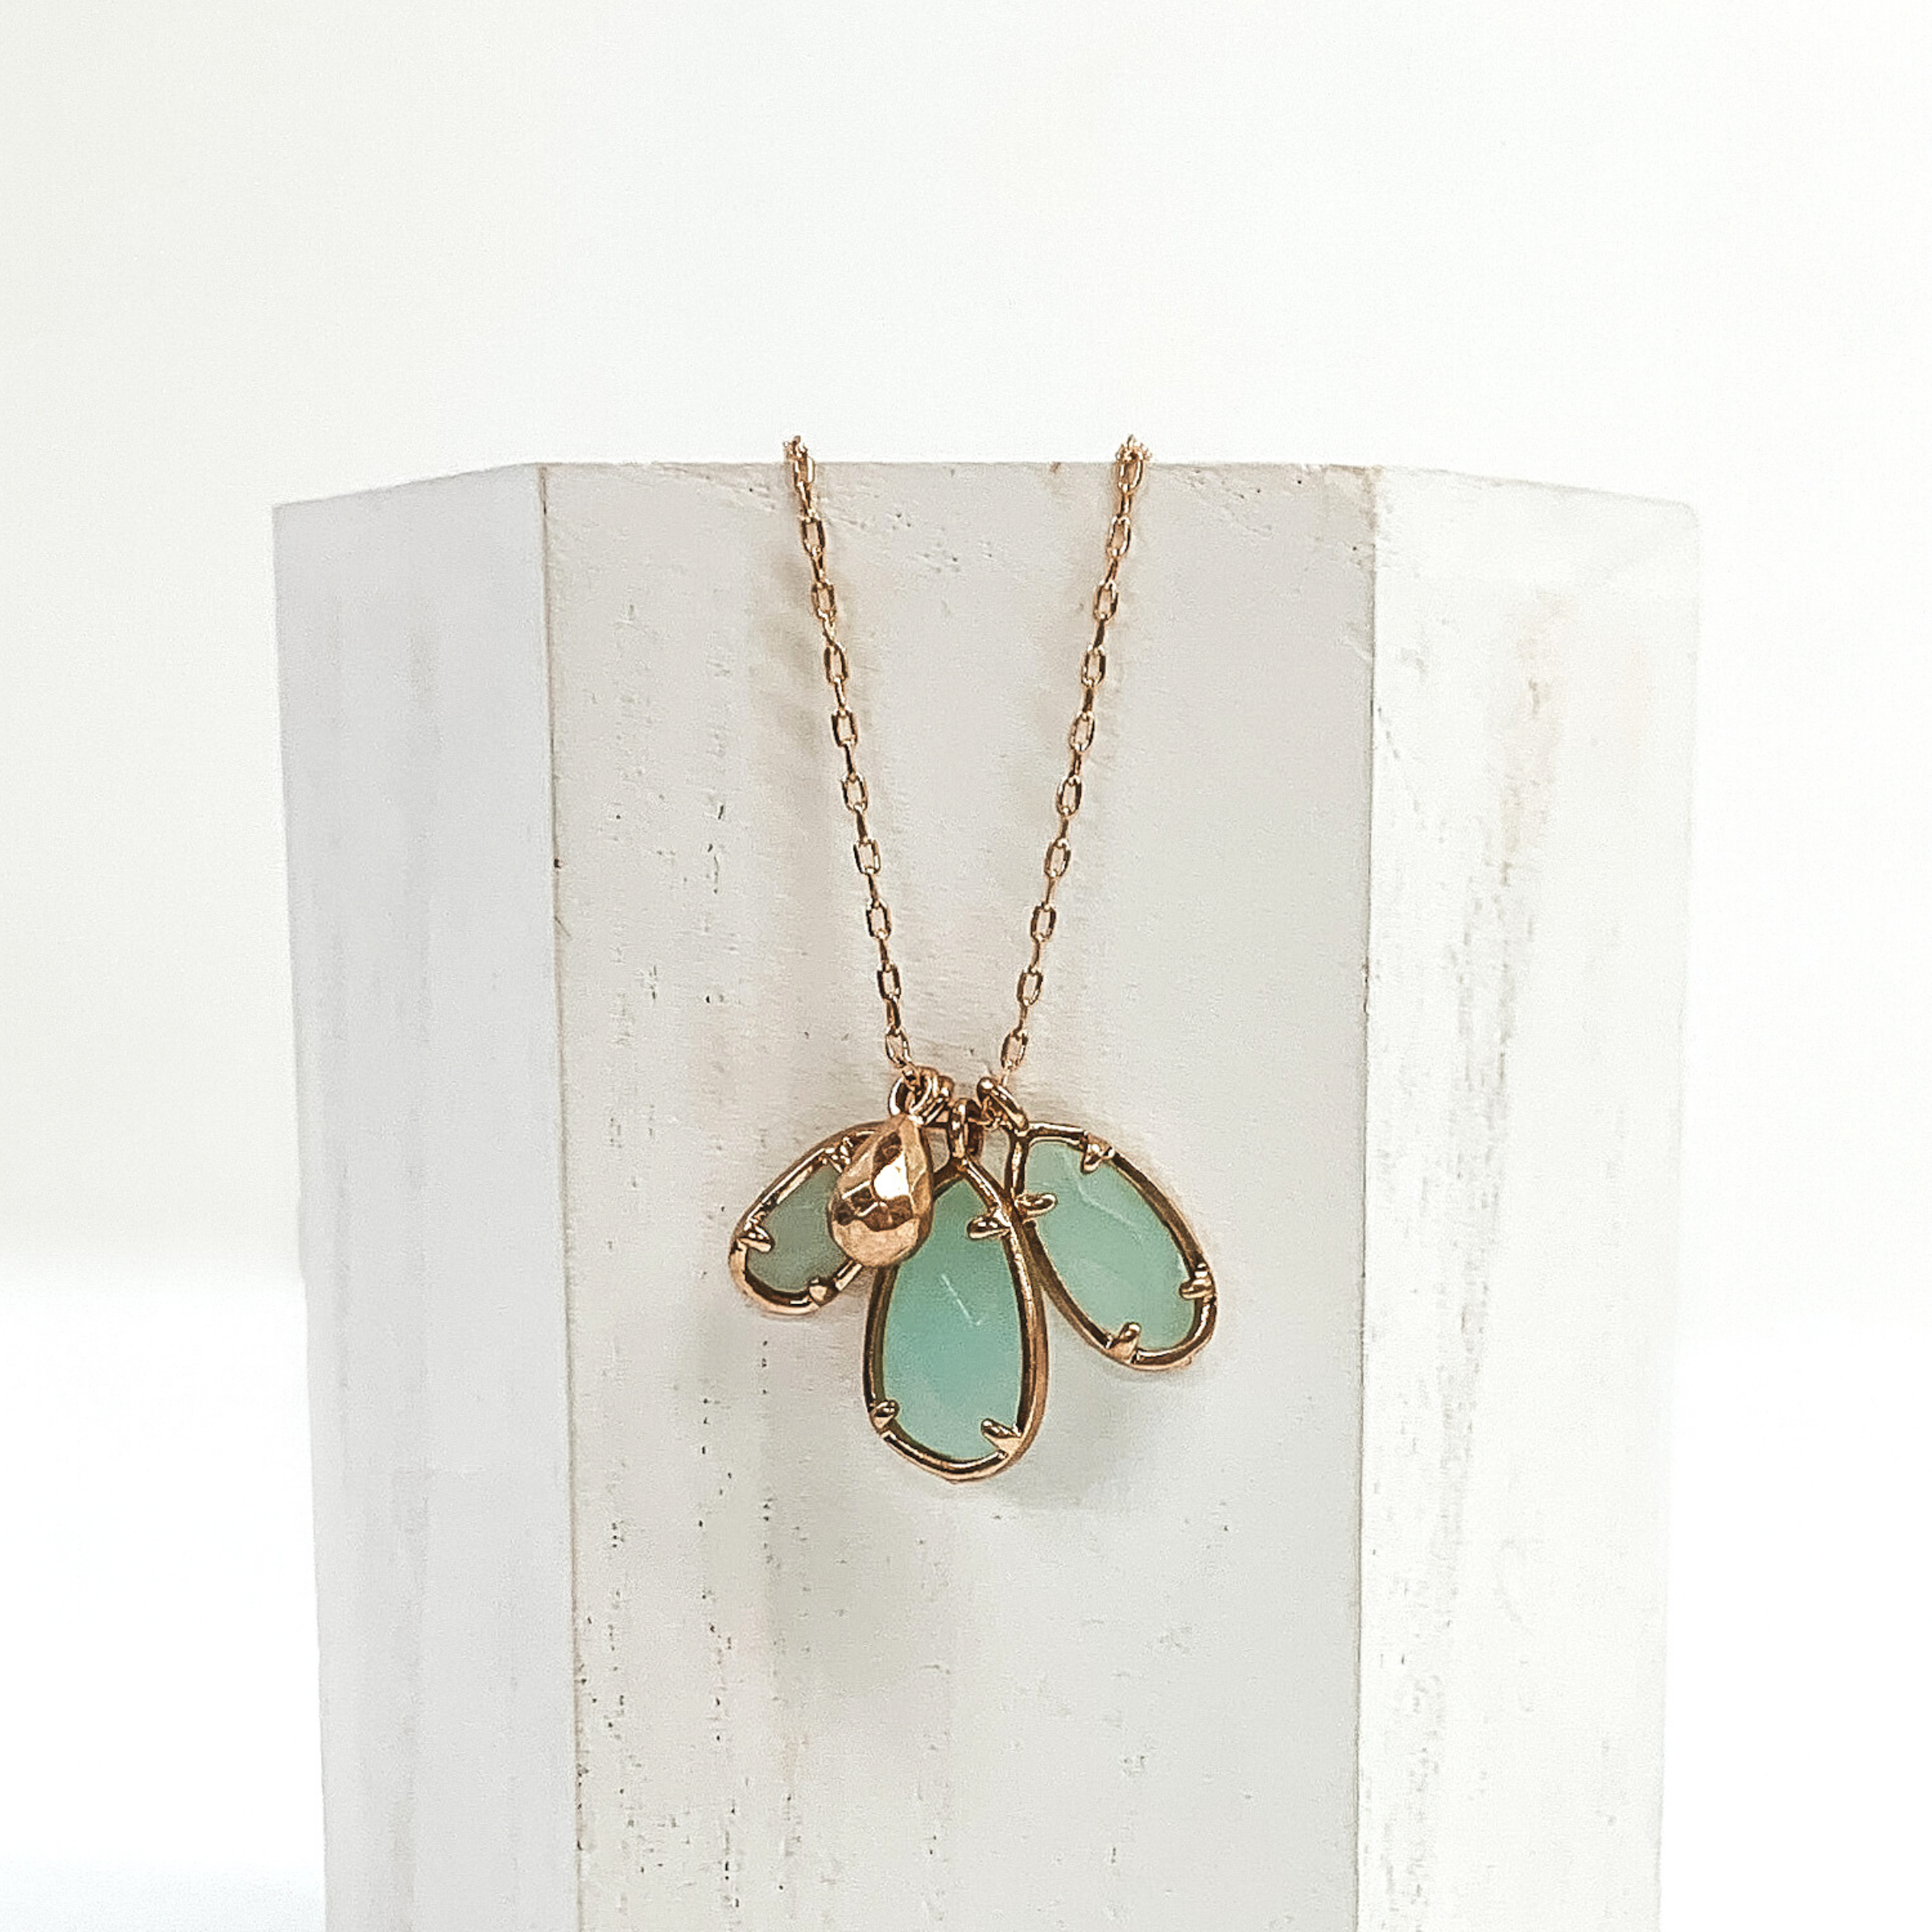 Small gold chain with three sage marbled teardrop stone pendants outlined in gold. It also has a tiny gold teardrop pendant. This necklace is pictured laying a white piece of wood on a white background.